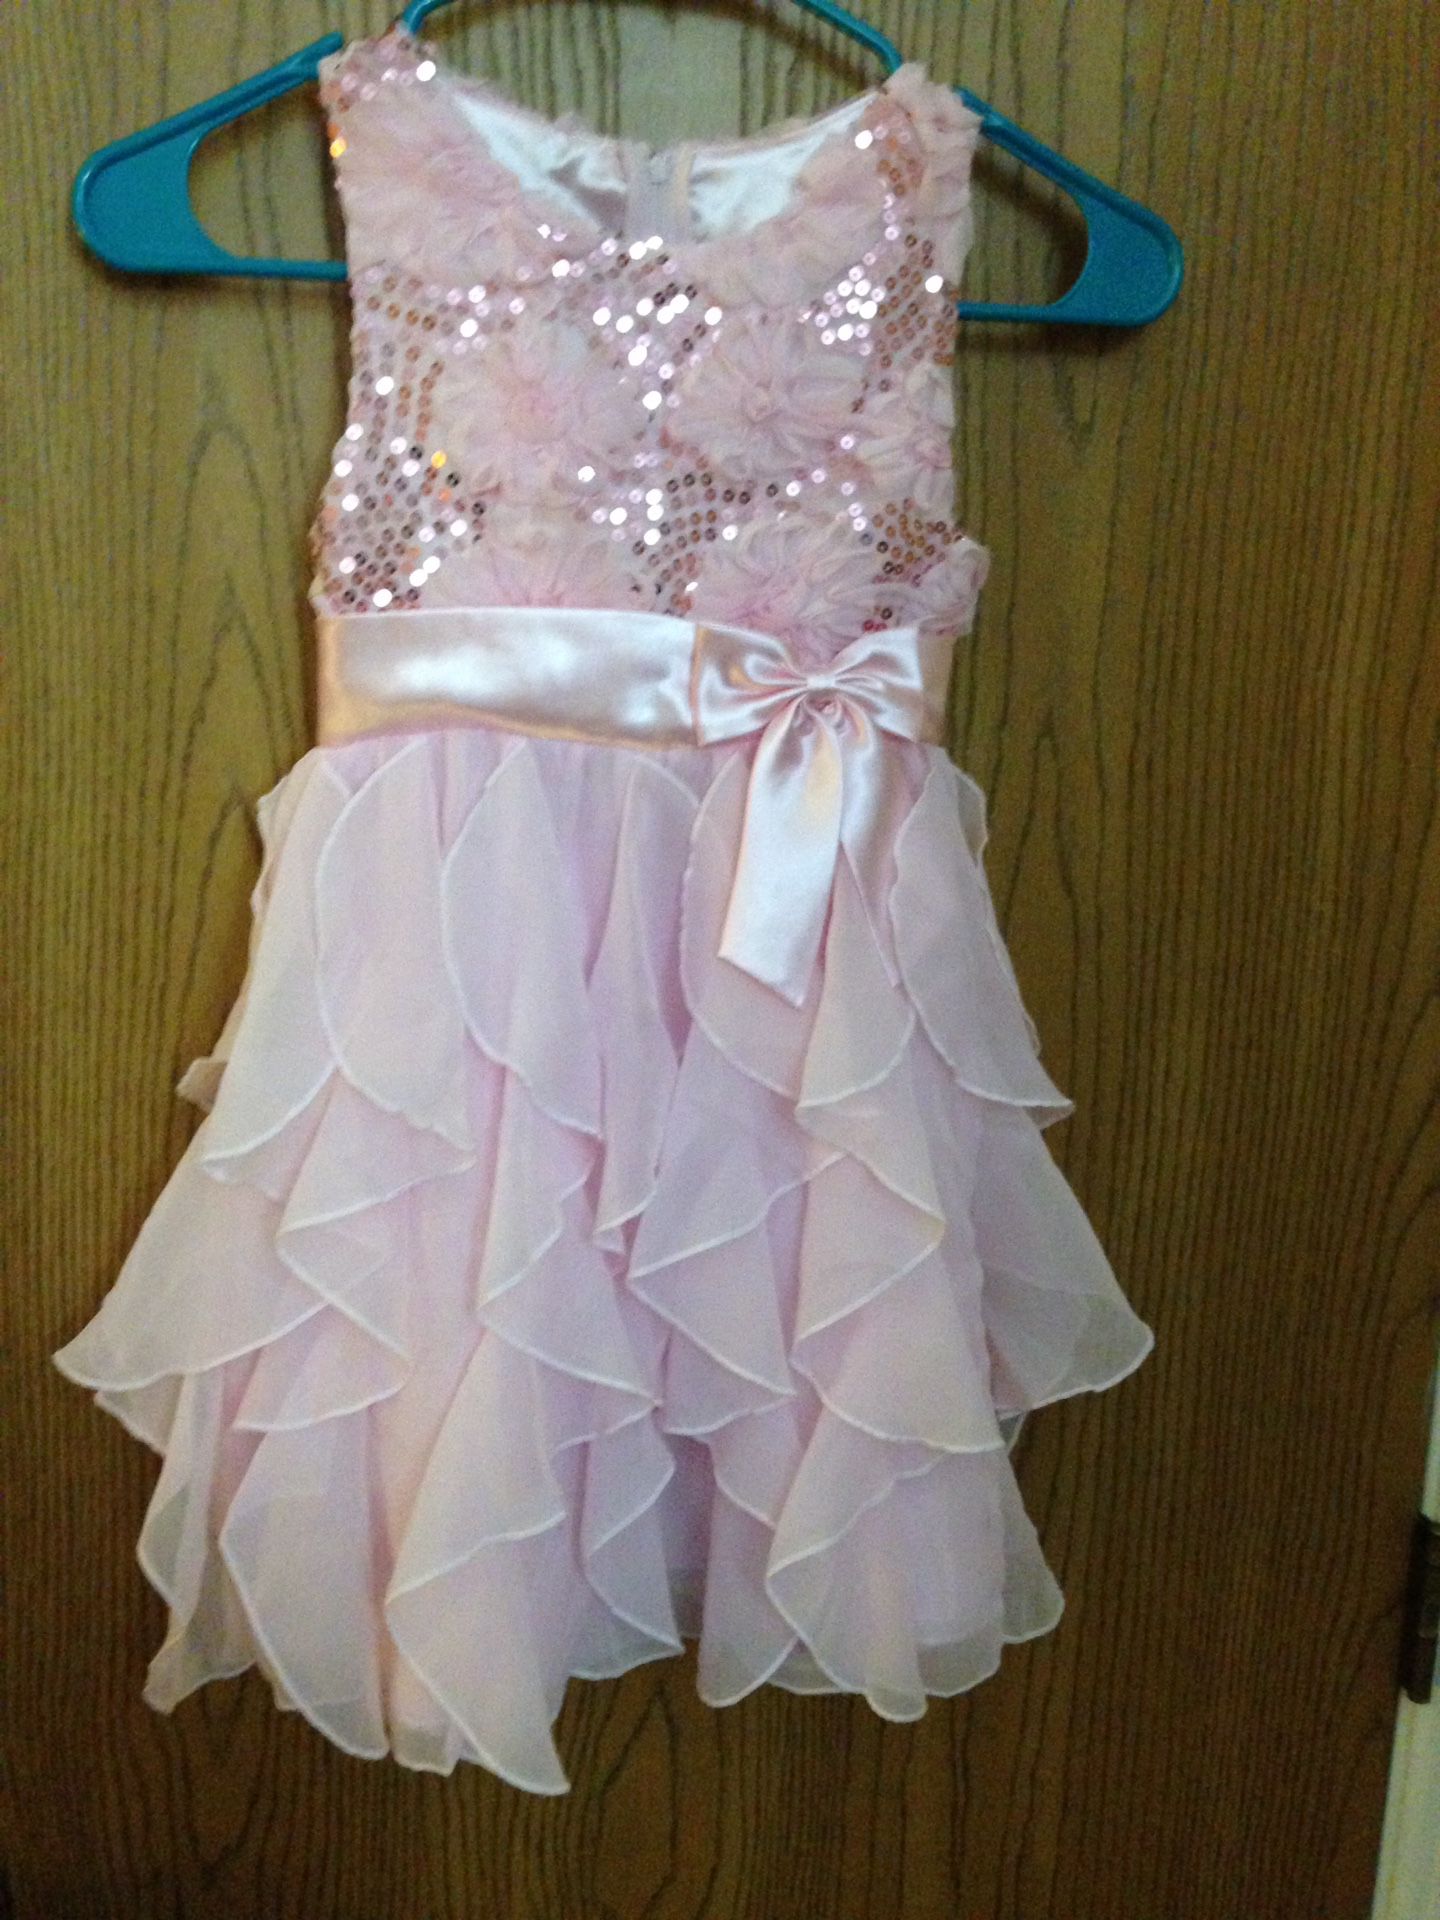 New never worn girls' size 6x Spring/Easter dress bought at Kohl's